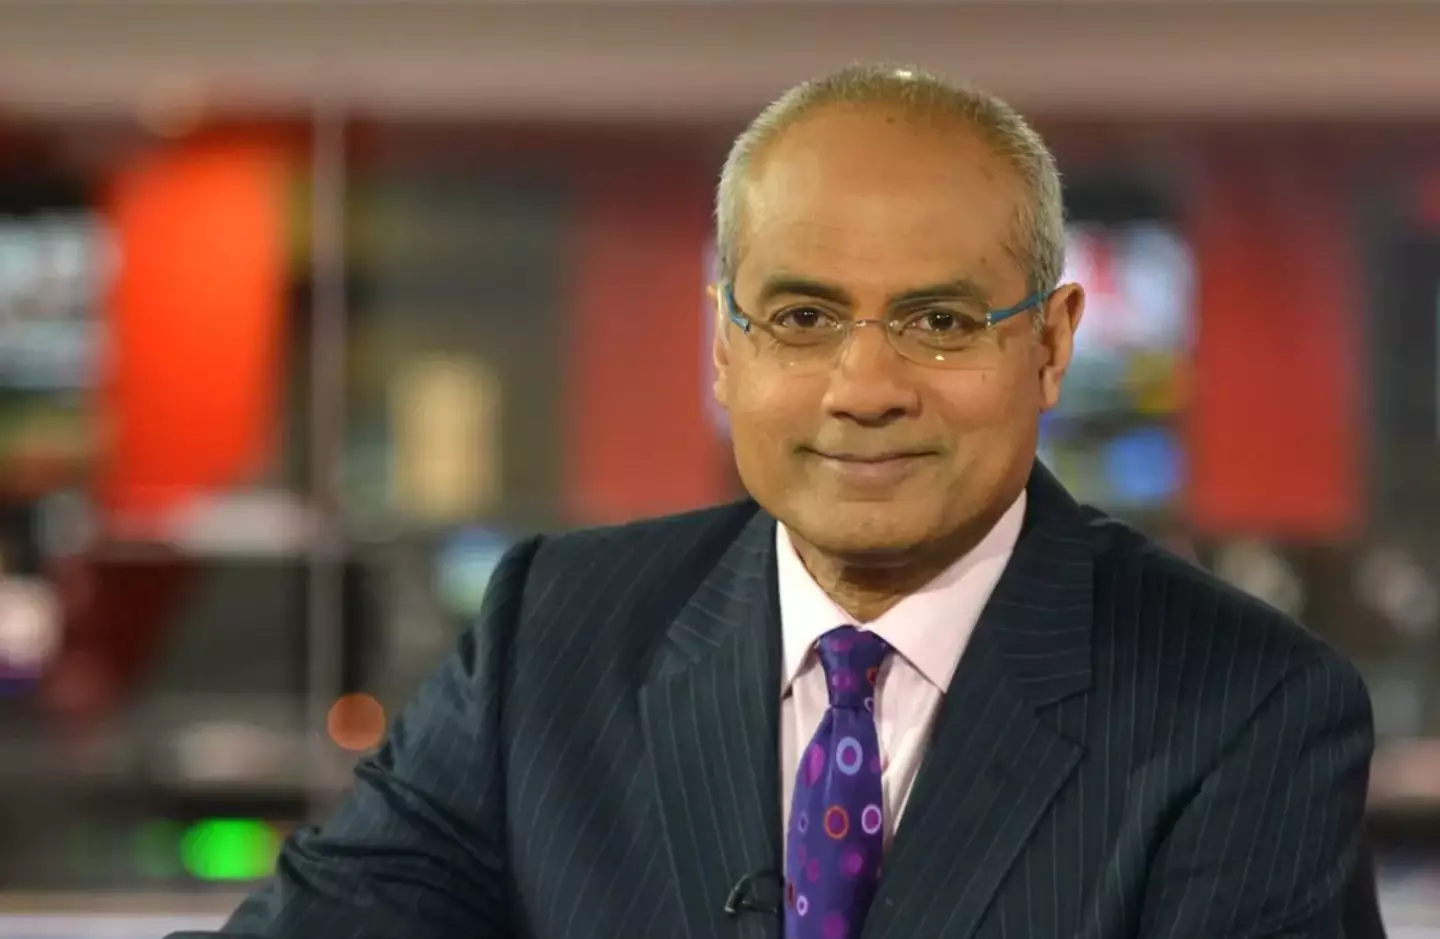 George Alagiah was diagnosed with stage four bowel cancer in 2014.